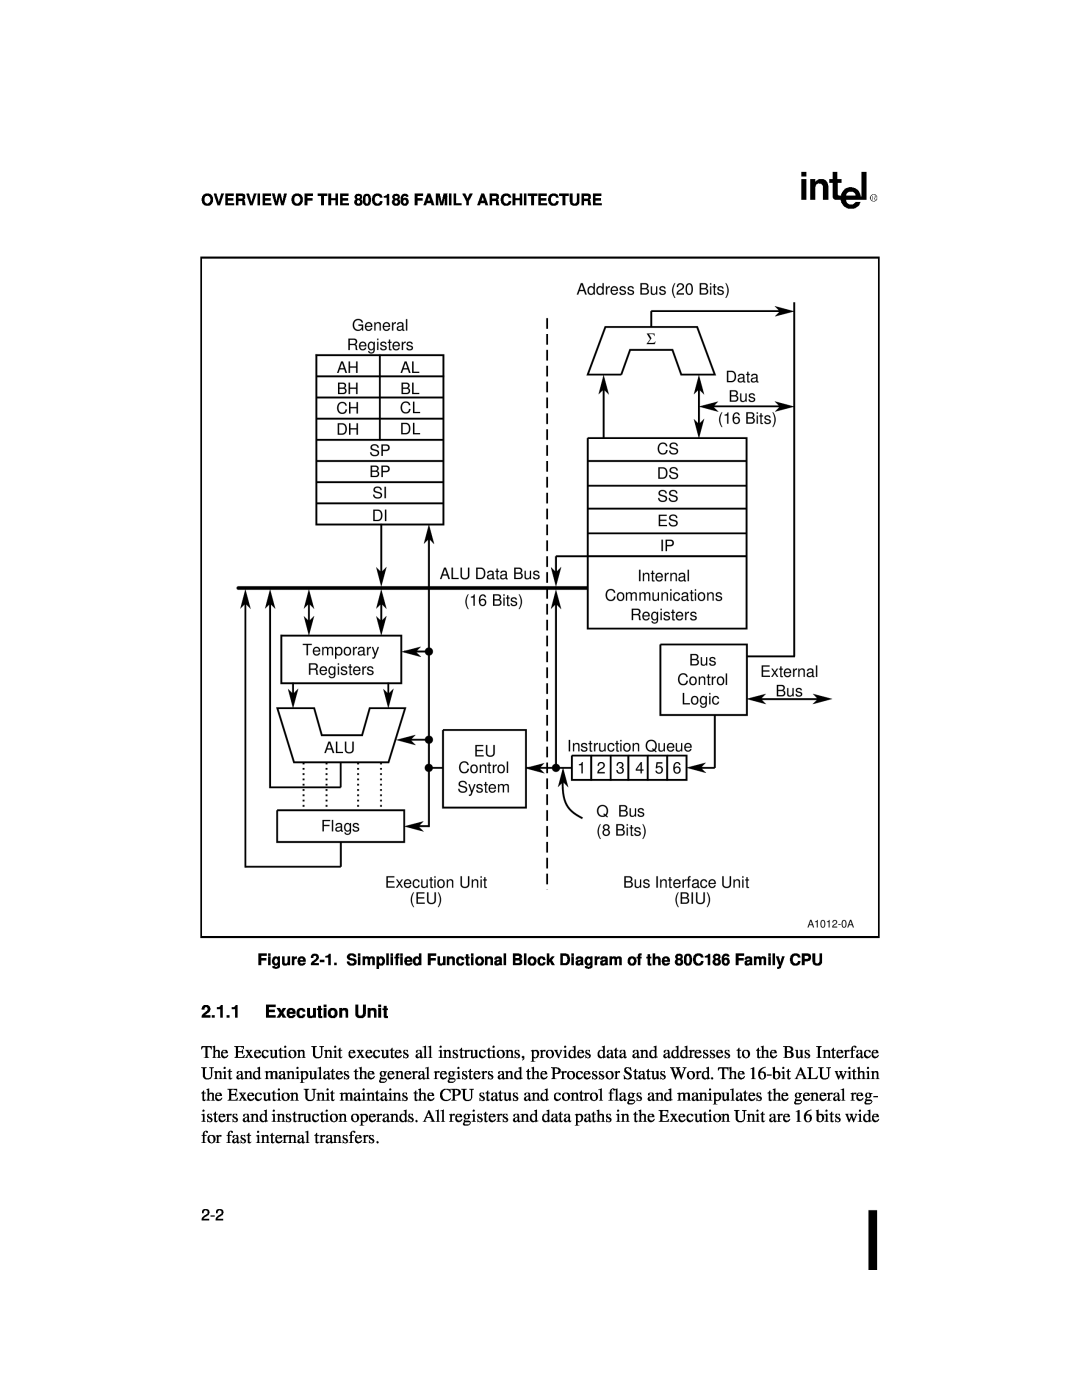 Intel 80C186XL, 80C188XL user manual 2.1.1Execution Unit, OVERVIEW OF THE 80C186 FAMILY ARCHITECTURE 